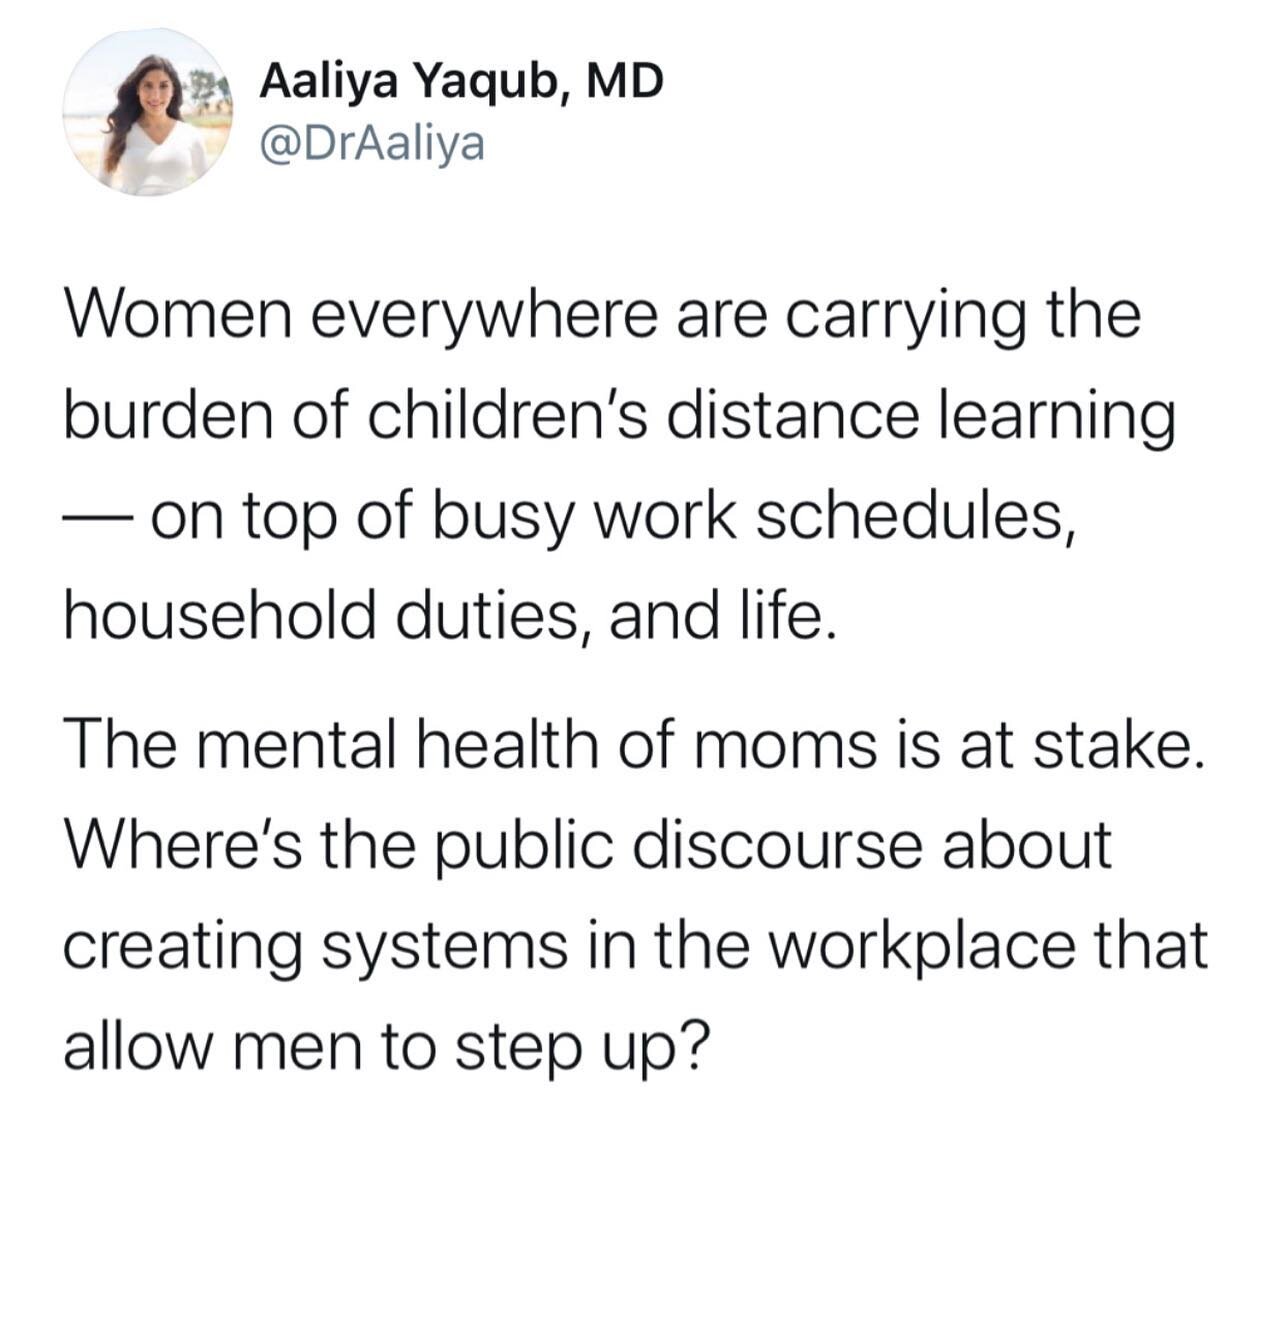 We Are NOT OK.
⠀⠀⠀⠀⠀⠀⠀⠀
Friends, can we talk about something? I want you to know that if you&rsquo;re struggling right now because of distance learning/childcare/pandemic related responsibilities, you are not alone. It&rsquo;s ludicrous for society t